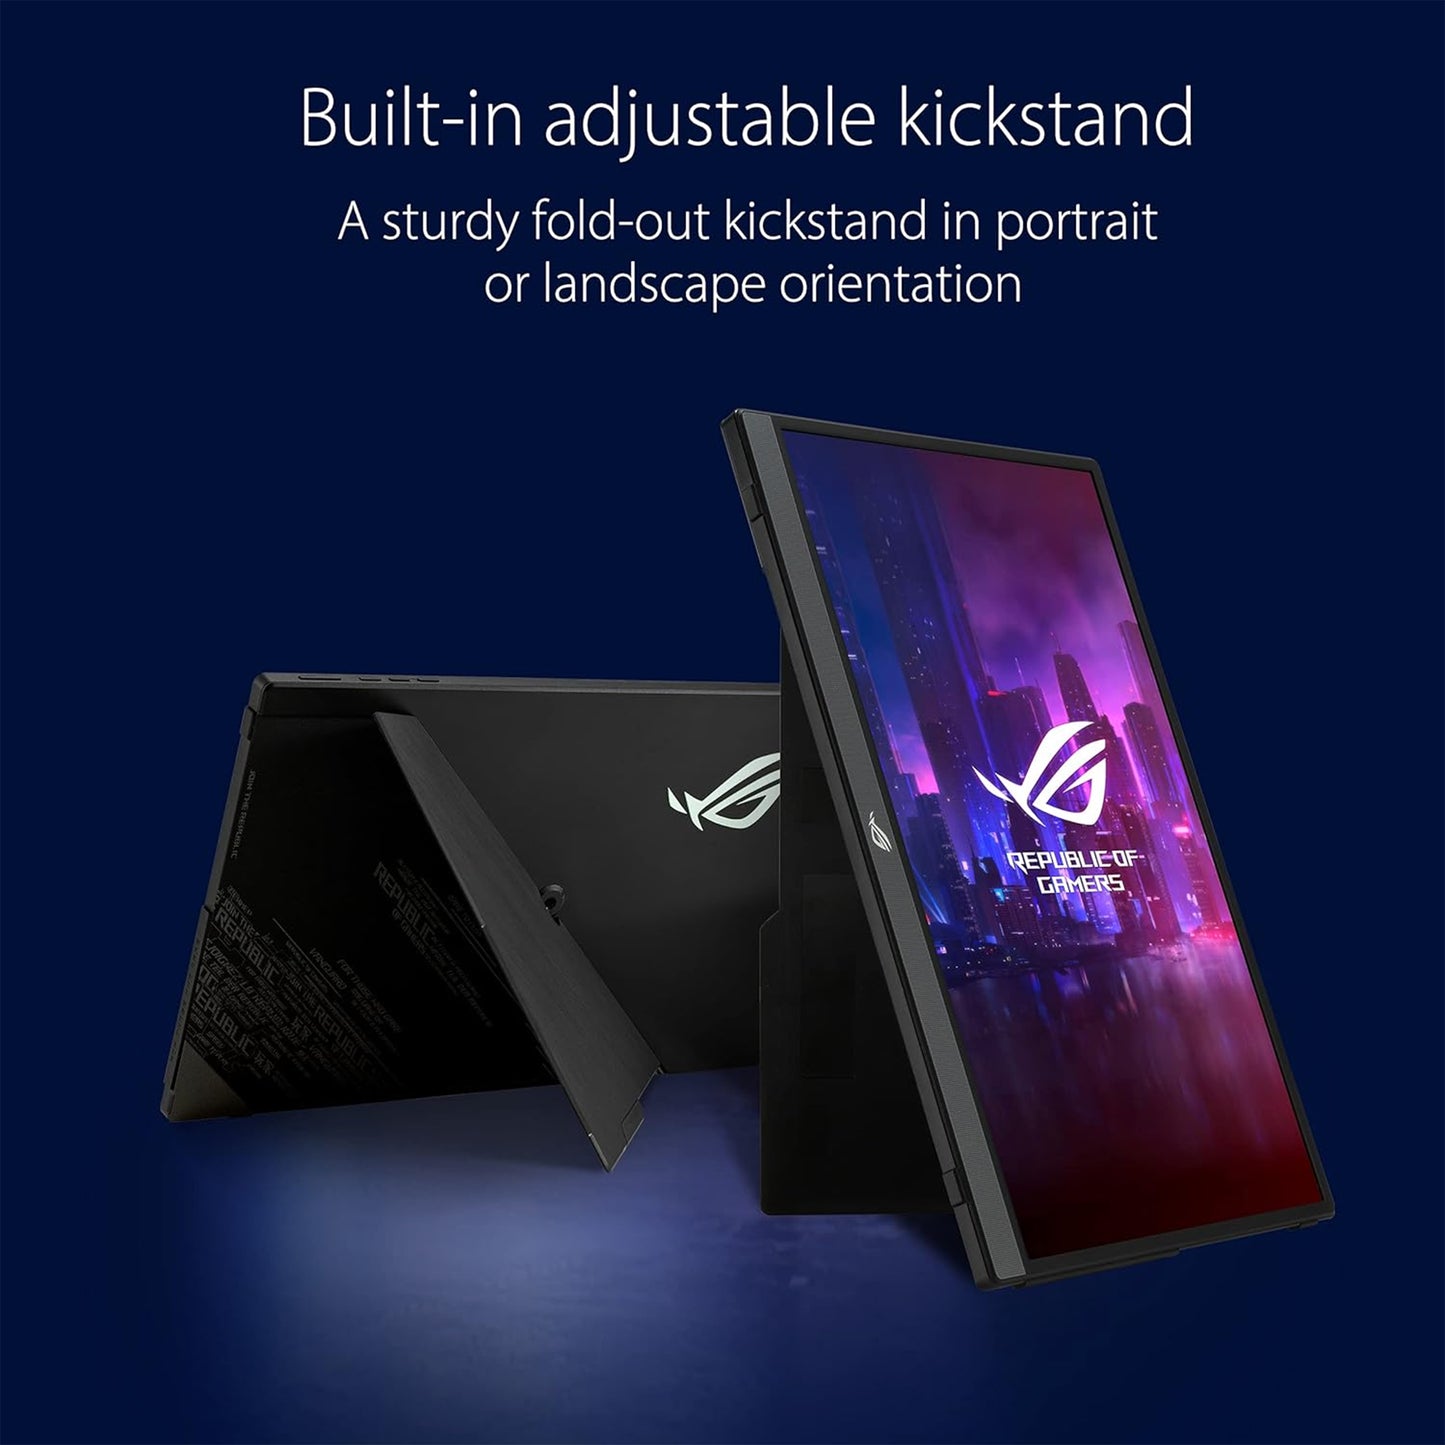 ASUS ROG Strix 15.6" FHD 1080P Portable Gaming Monitor XG16AHPE, 144Hz, IPS, G-SYNC Compatible, Built-in Battery, Kickstand, USB-C, Micro HDMI, for Laptop, PC, Phone, Console